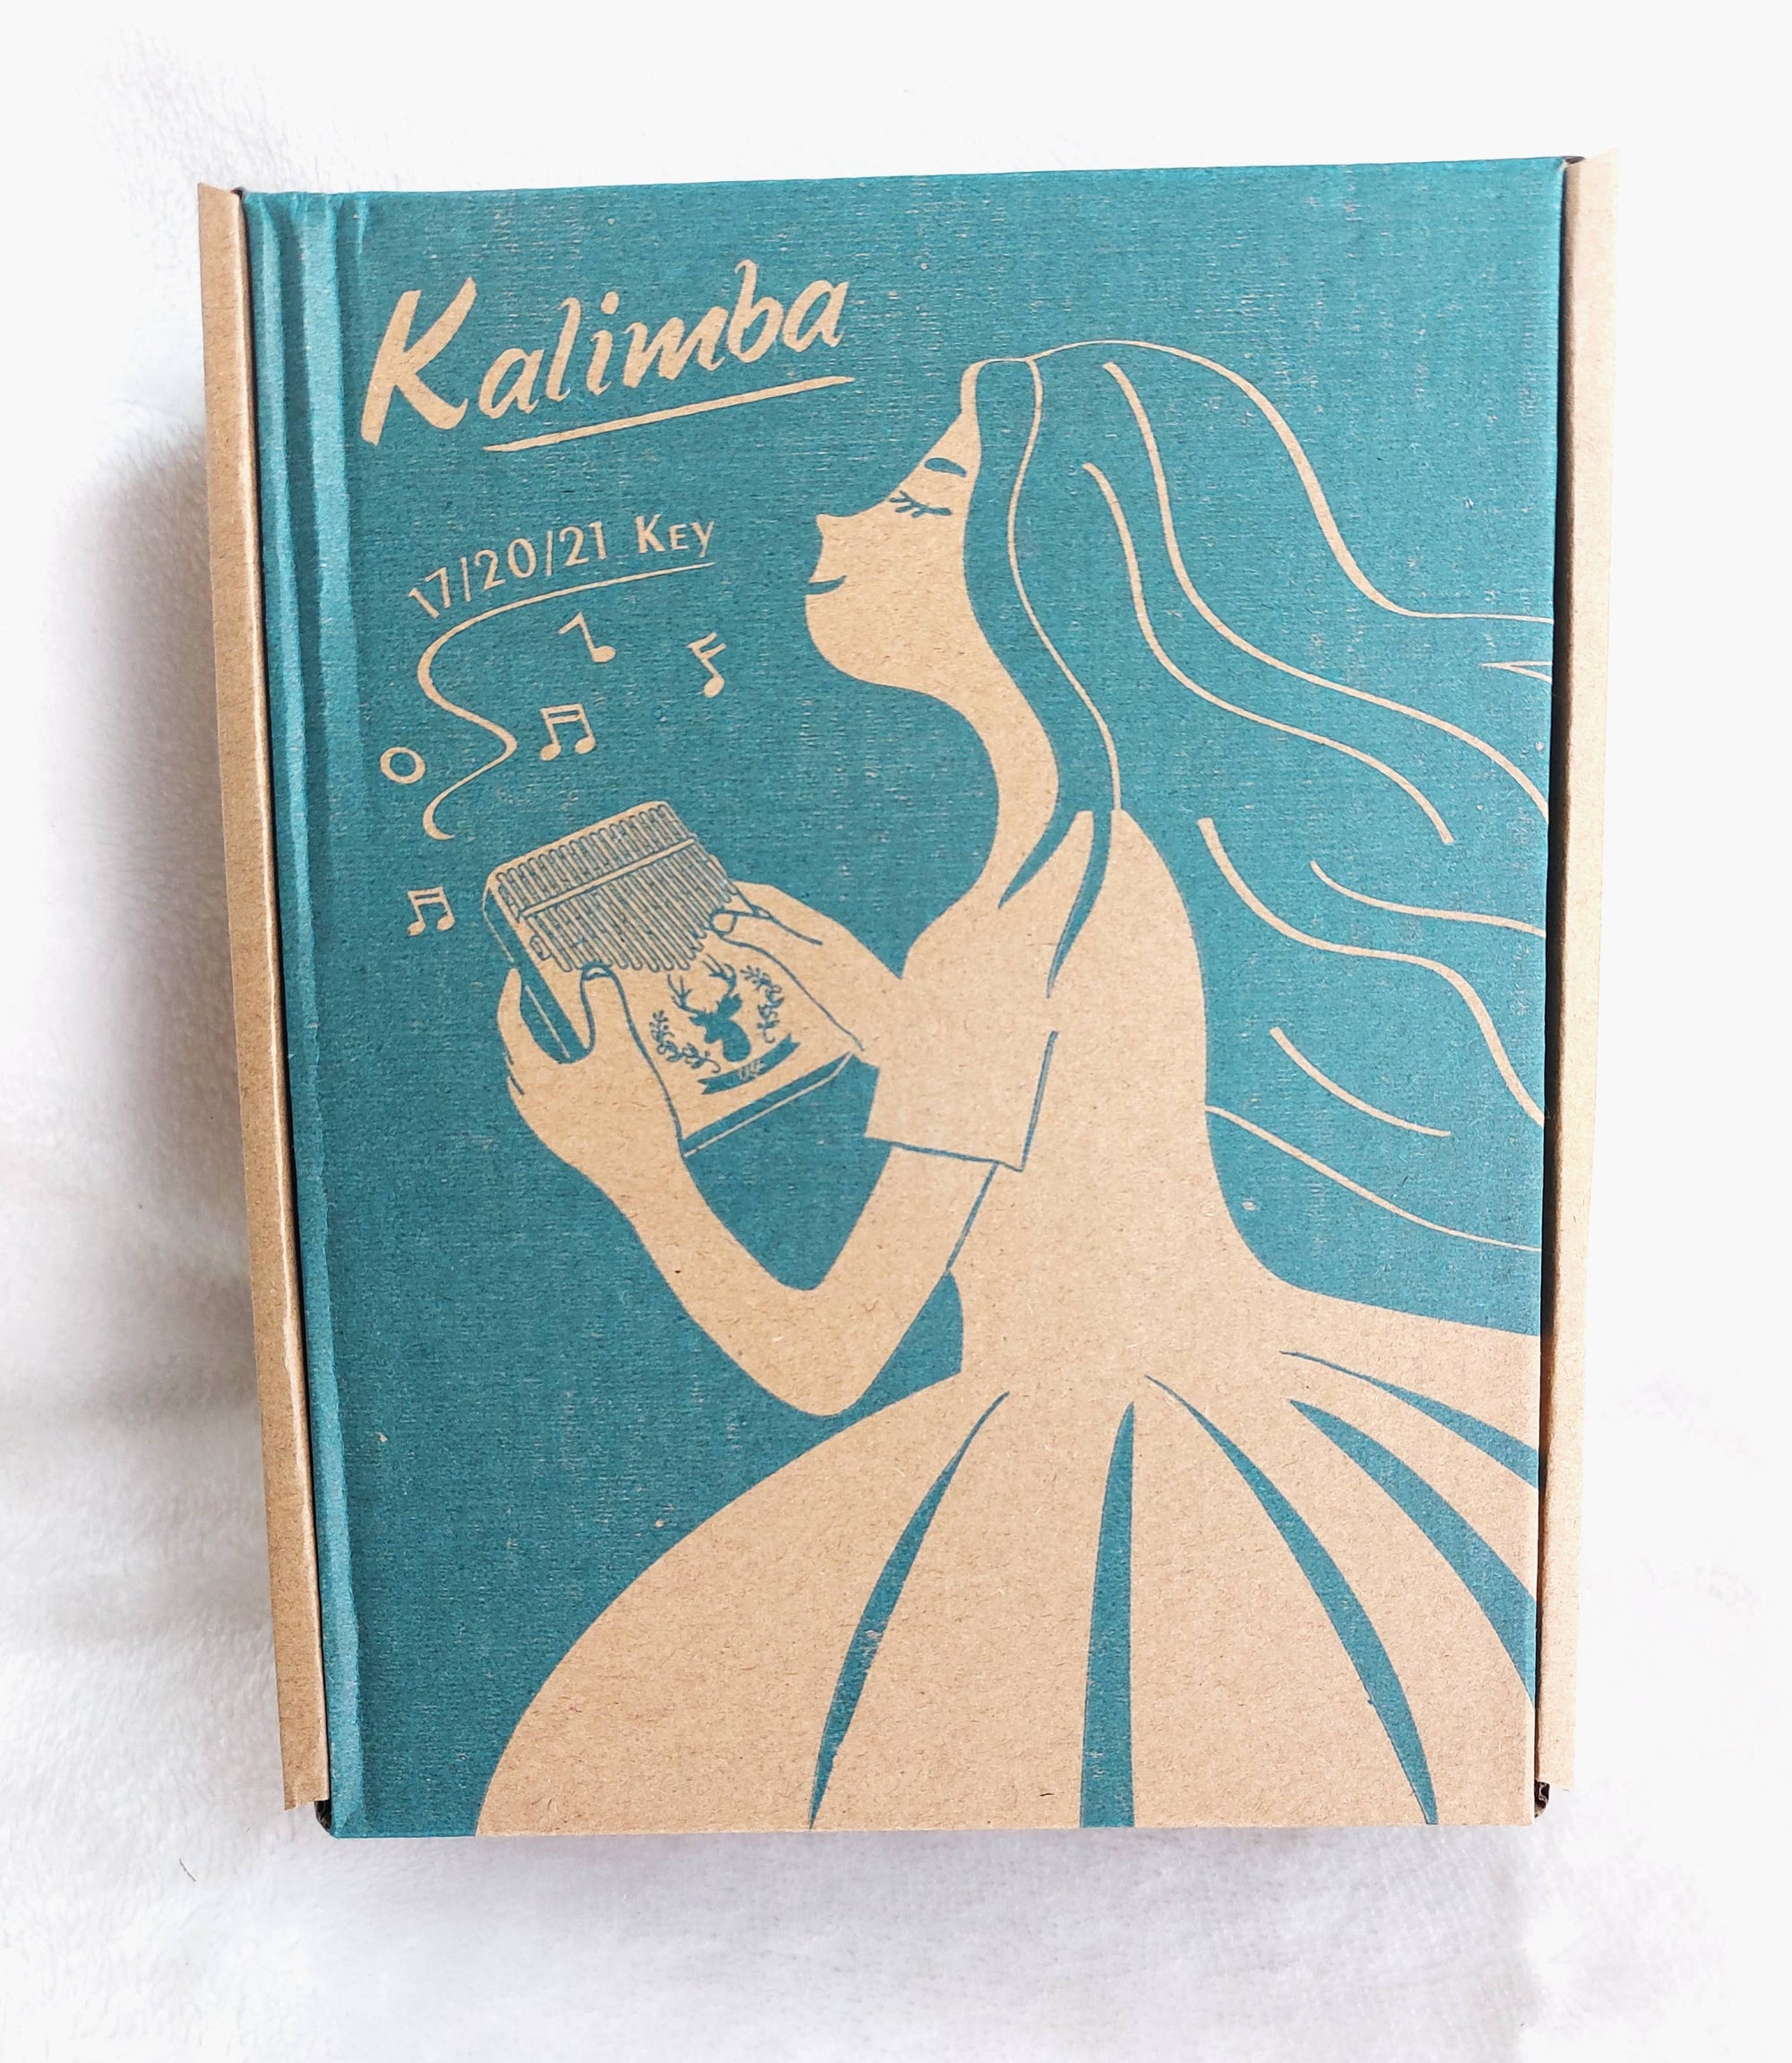 A book-style box with a graphic of a woman playing a Kalimba Musical Instrument, labeled "kalimba 17/21 key," against a teal background.